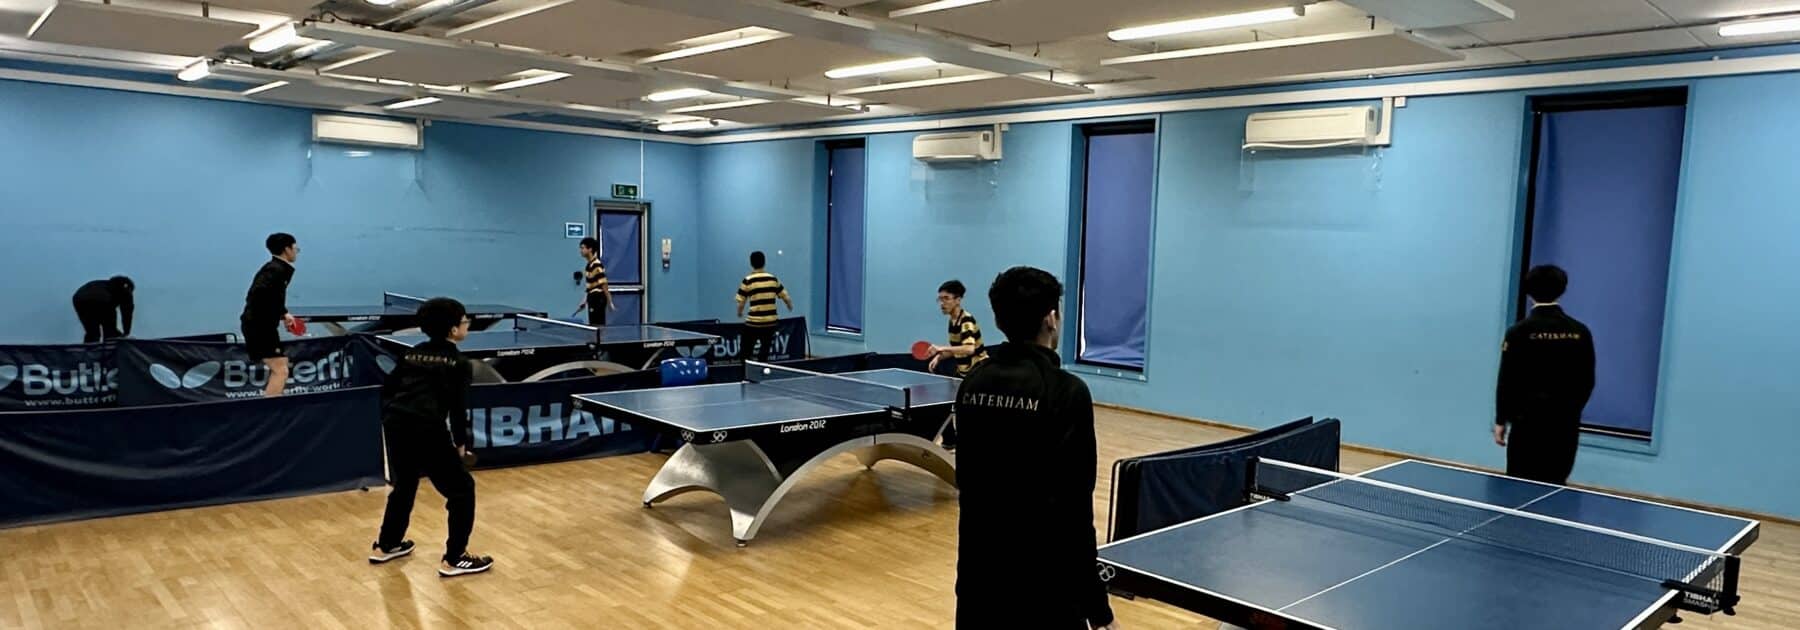 Surrey Table Tennis Champions Play at Zone 7 Finals